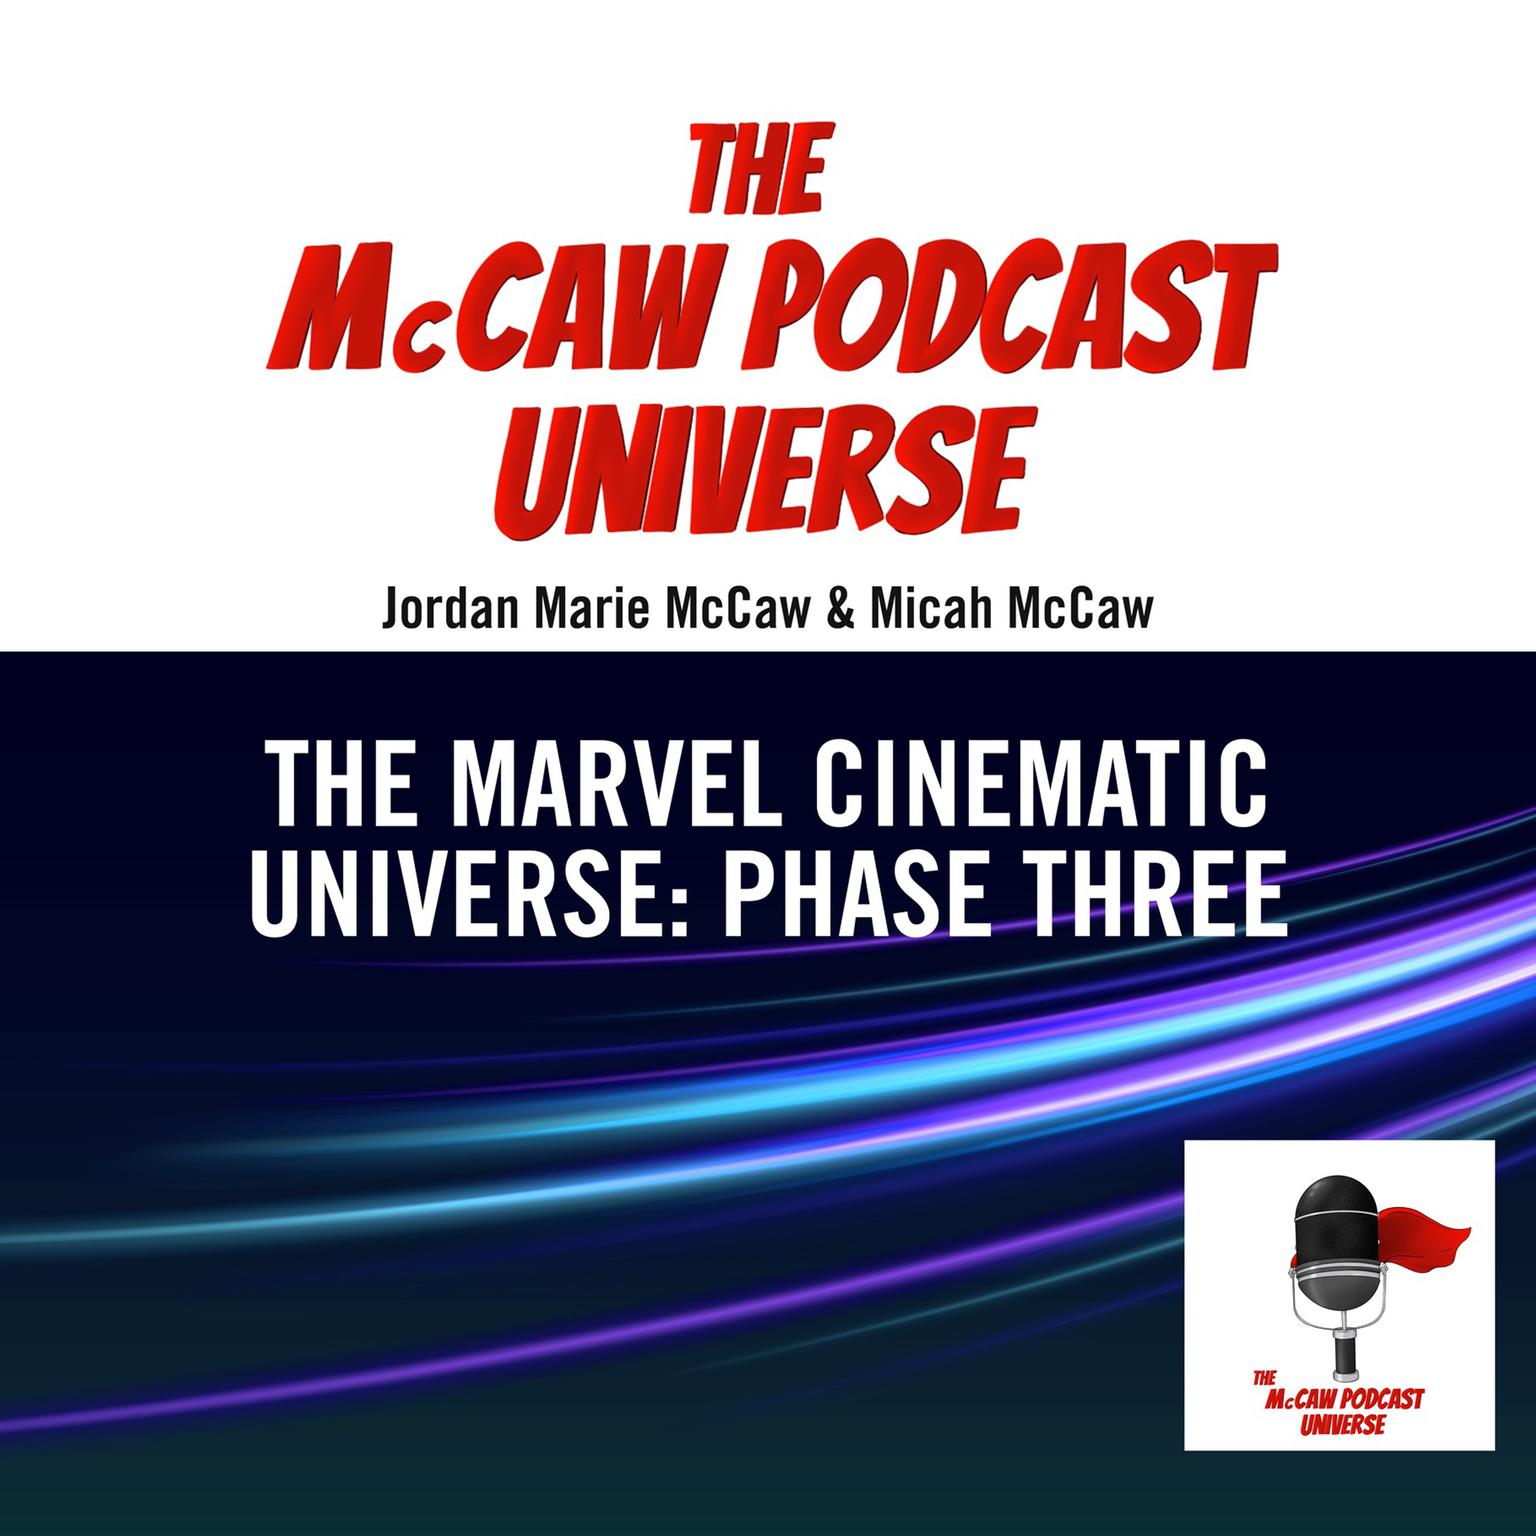 The McCaw Podcast Universe: The Marvel Cinematic Universe: Phase Three Audiobook, by Jordan Marie McCaw